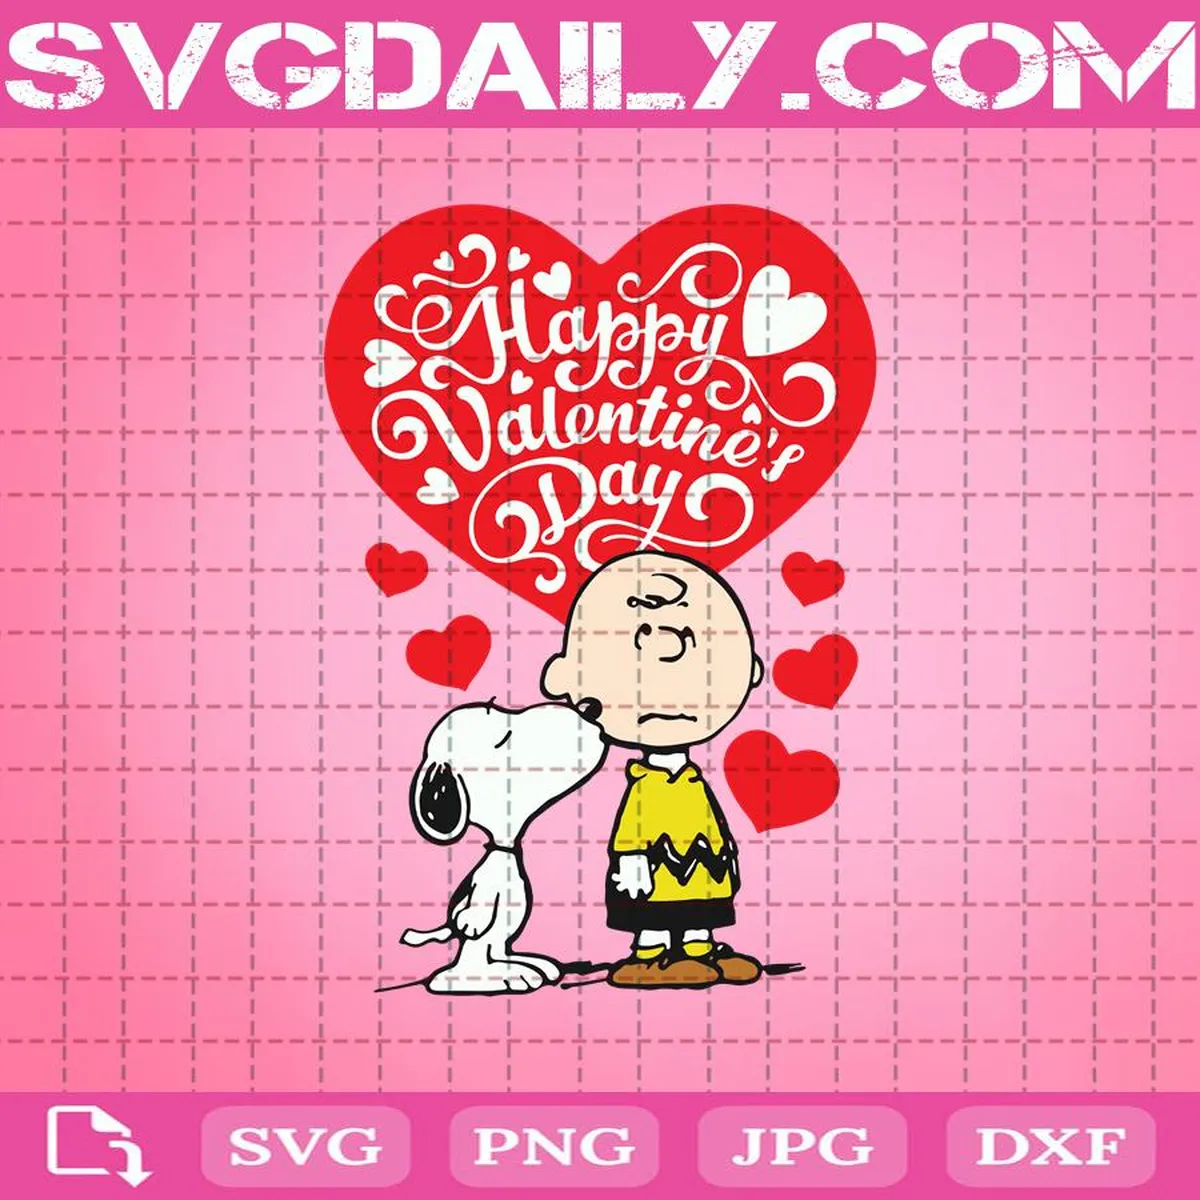 Happy Valentine's Day Svg, Snoopy Kissing Charlie Svg, Charlie Brown Valentine Svg, Peanuts Love Day Svg, Red Love Heart Svg